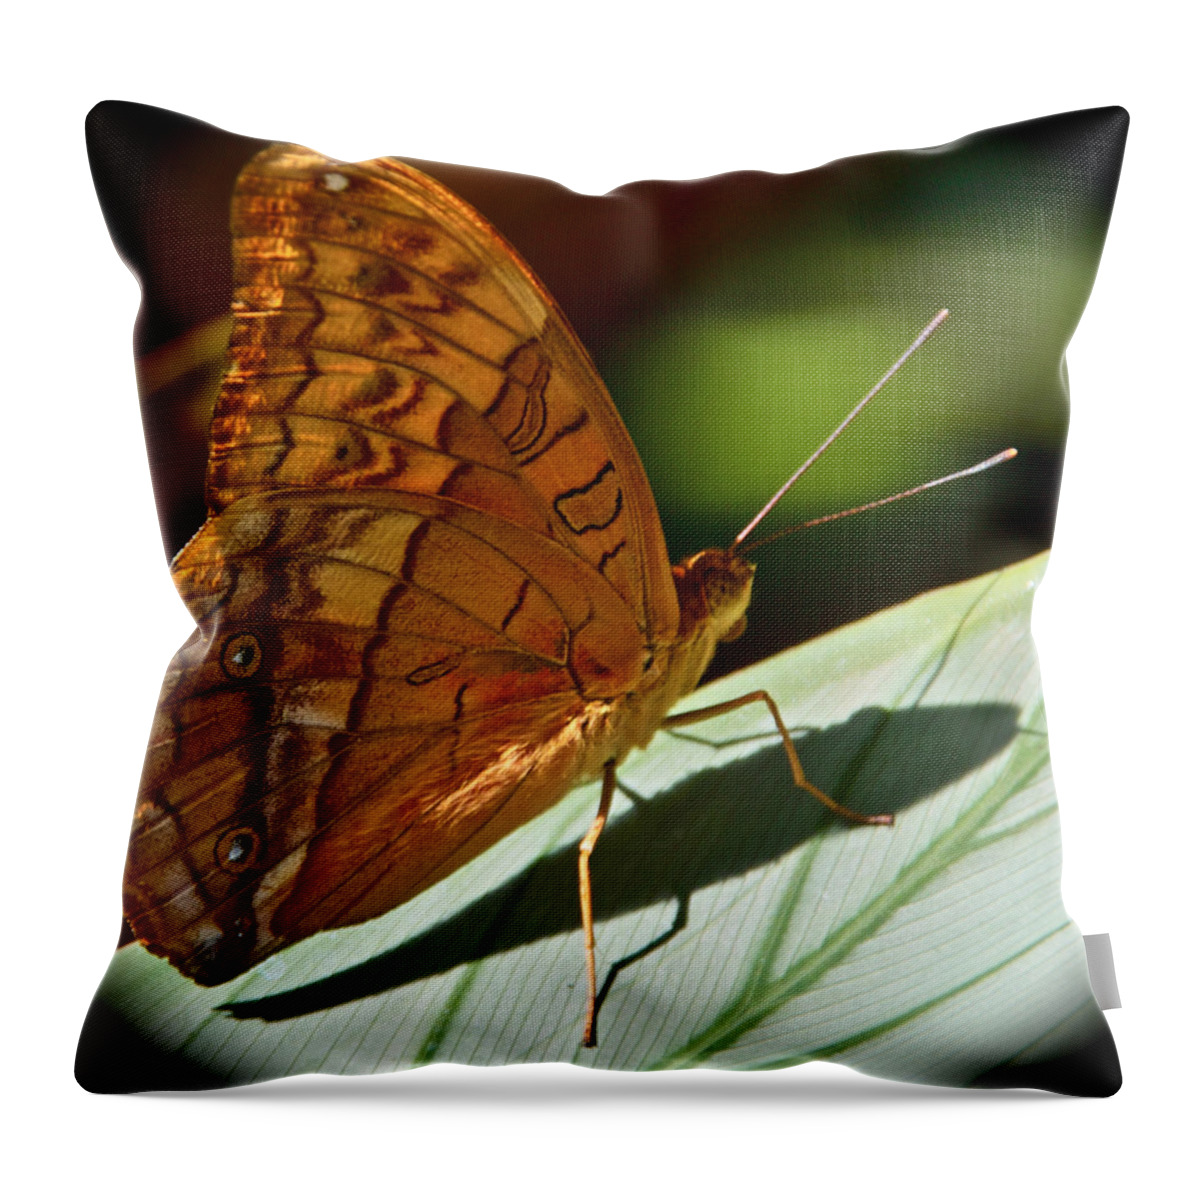 Butterfly Throw Pillow featuring the photograph Poised by Jocelyn Kahawai